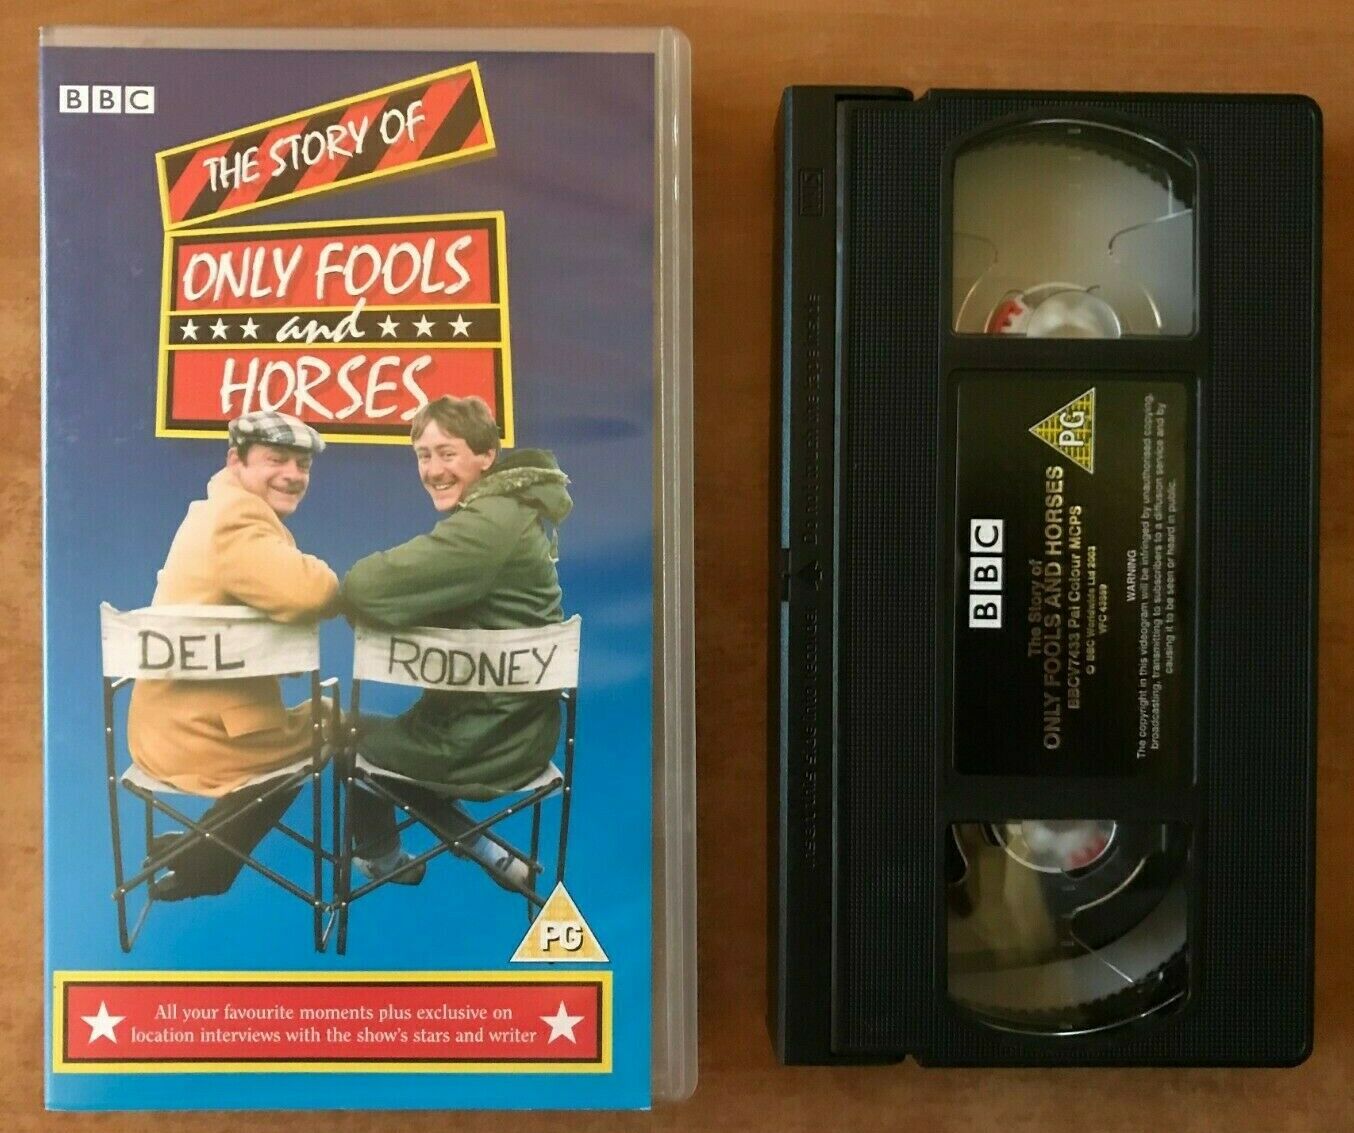 The Story Of Only Fools And Horses [Documentary] BBC TV Series - Comedy - VHS-